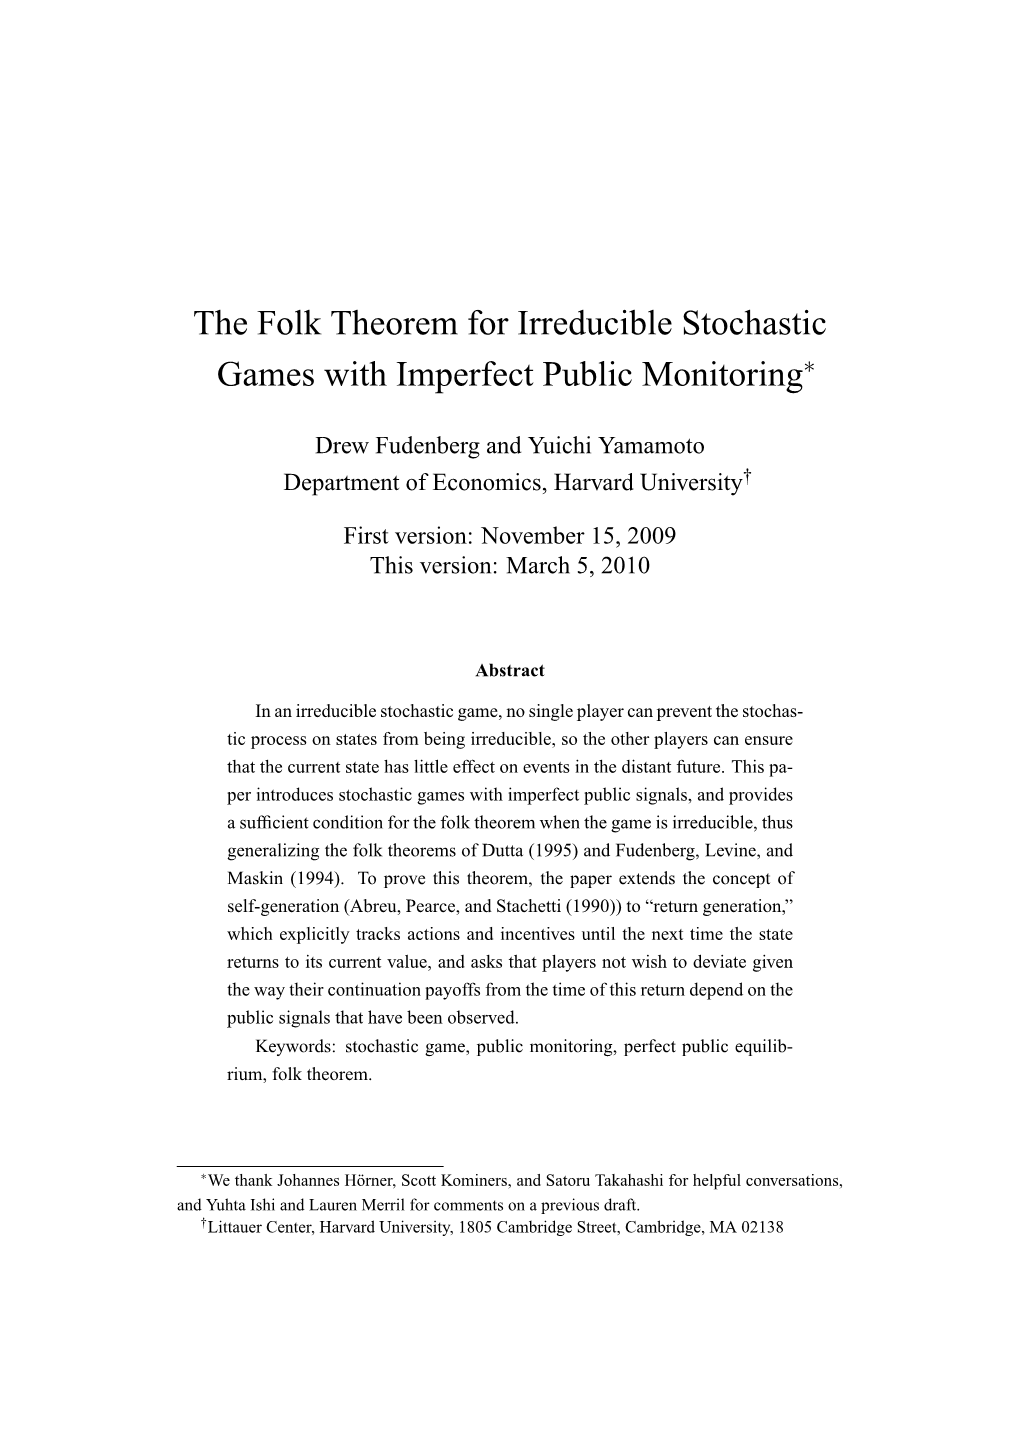 The Folk Theorem for Irreducible Stochastic Games with Imperfect Public Monitoring∗